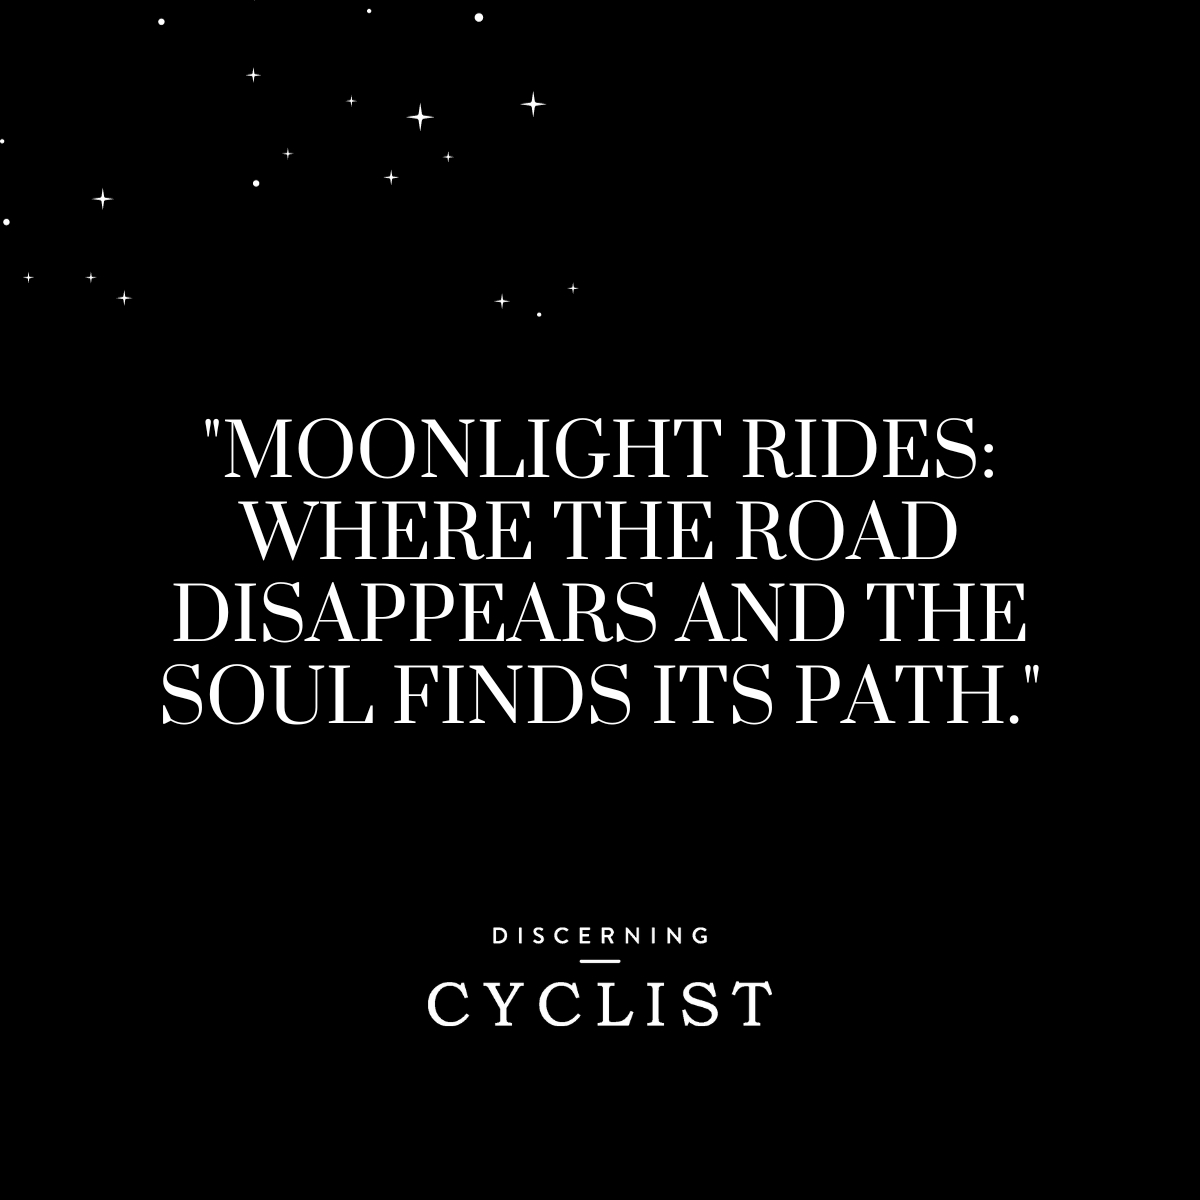 "Moonlight rides: where the road disappears and the soul finds its path."